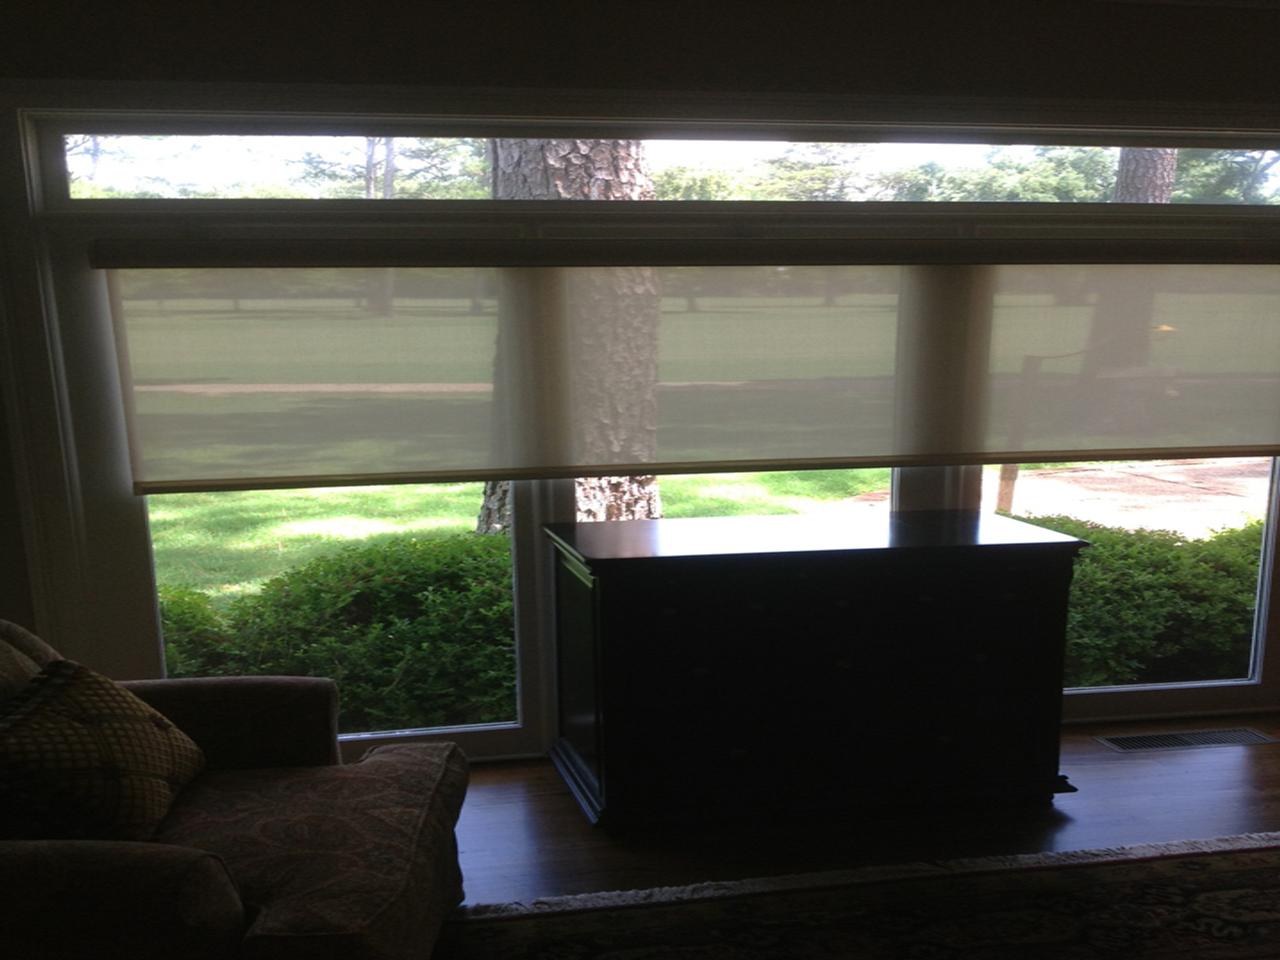 Screen Shades in living room